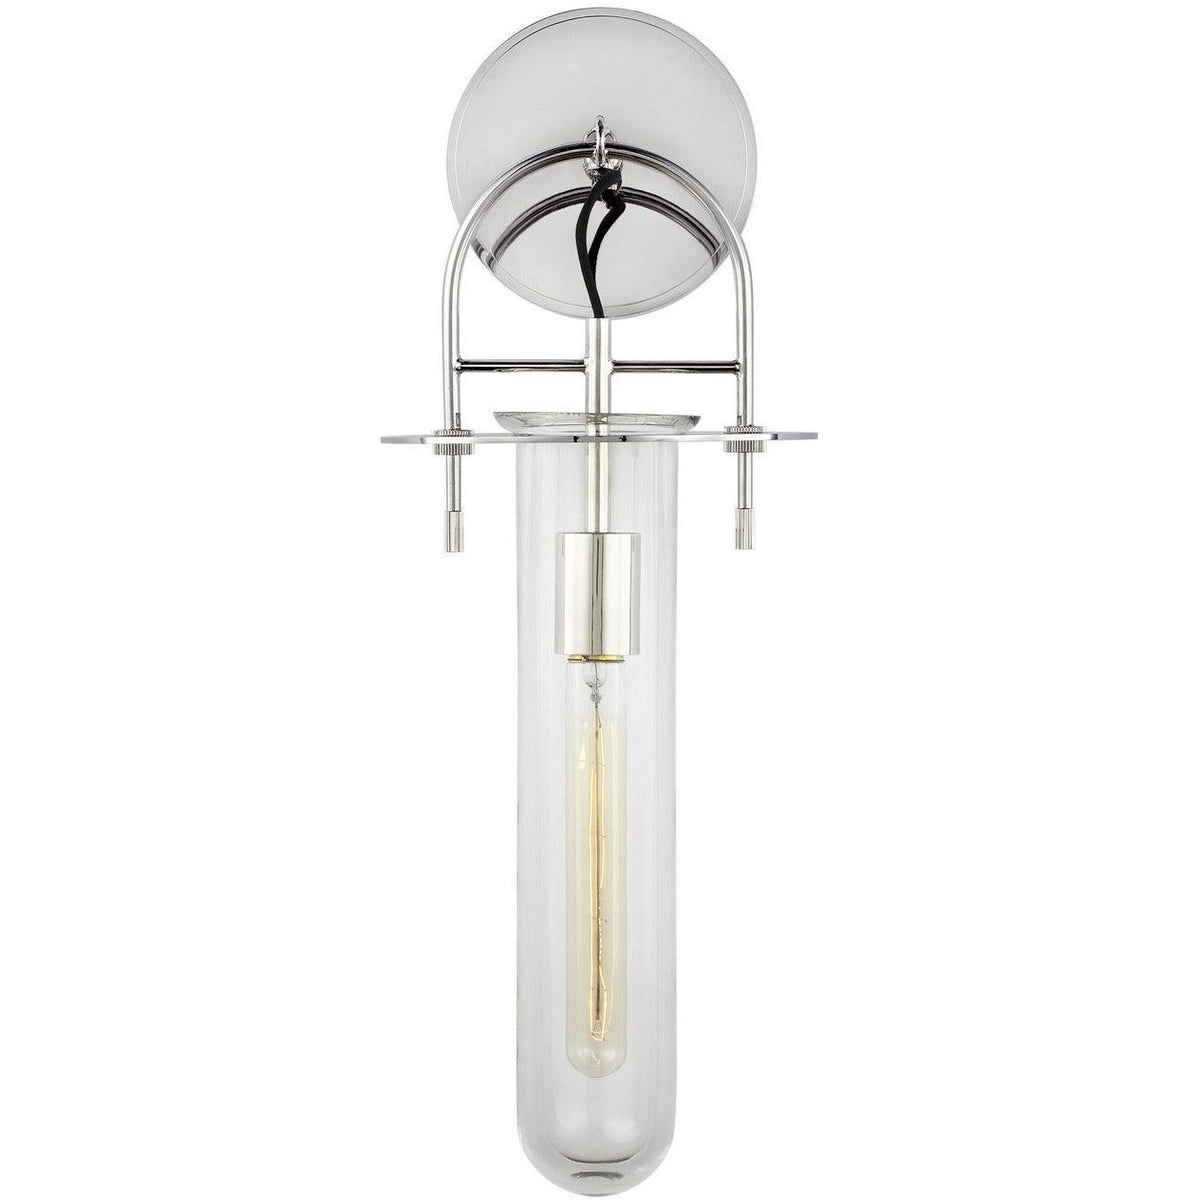 Visual Comfort Studio Collection - Nuance Wall Sconce - KW1061PN | Montreal Lighting & Hardware